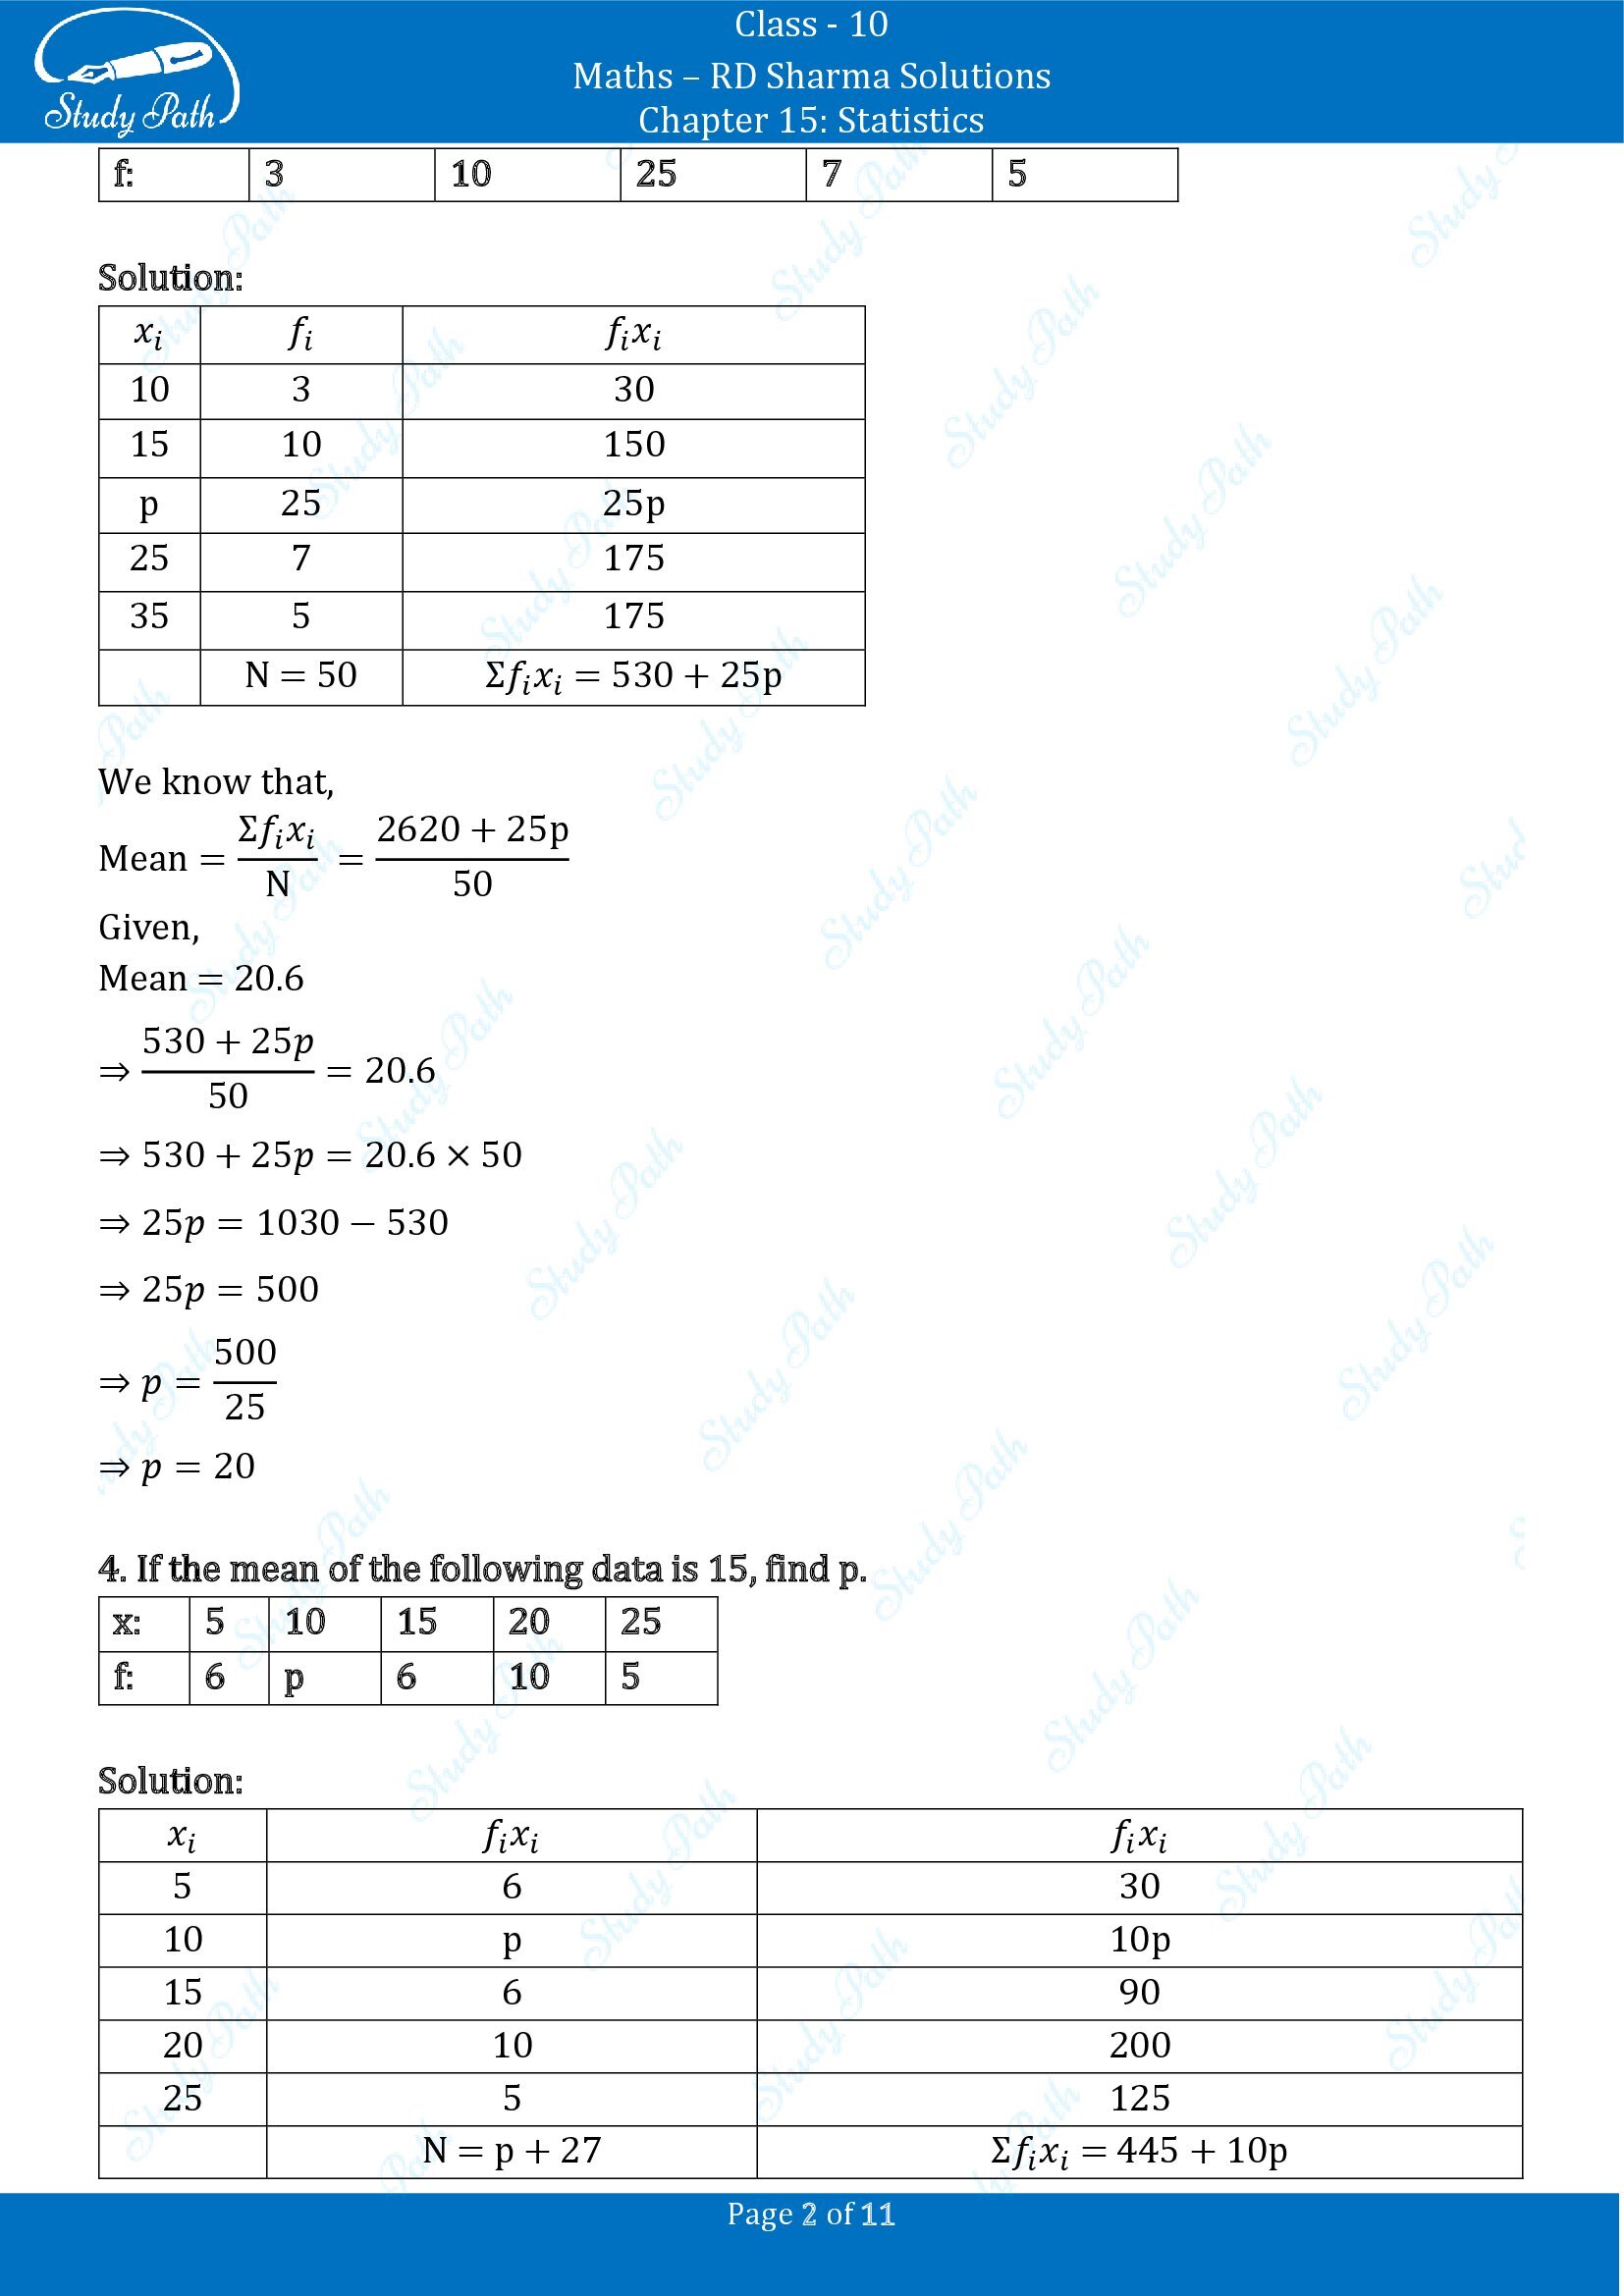 RD Sharma Solutions Class 10 Chapter 15 Statistics Exercise 15.1 00002